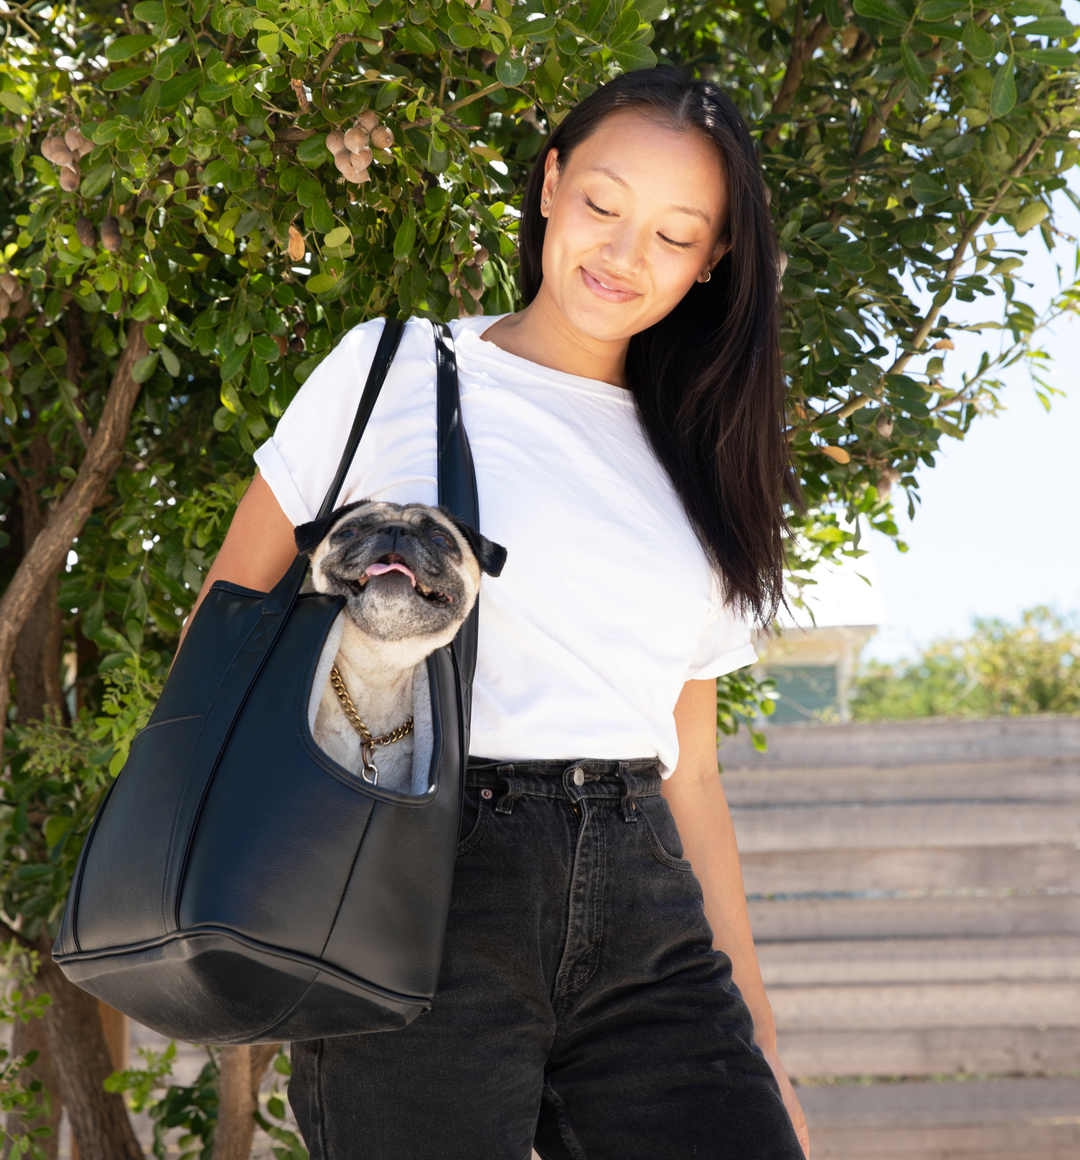 PupTote™ 3-in-1 Faux Leather Dog Carrier Bag - Black